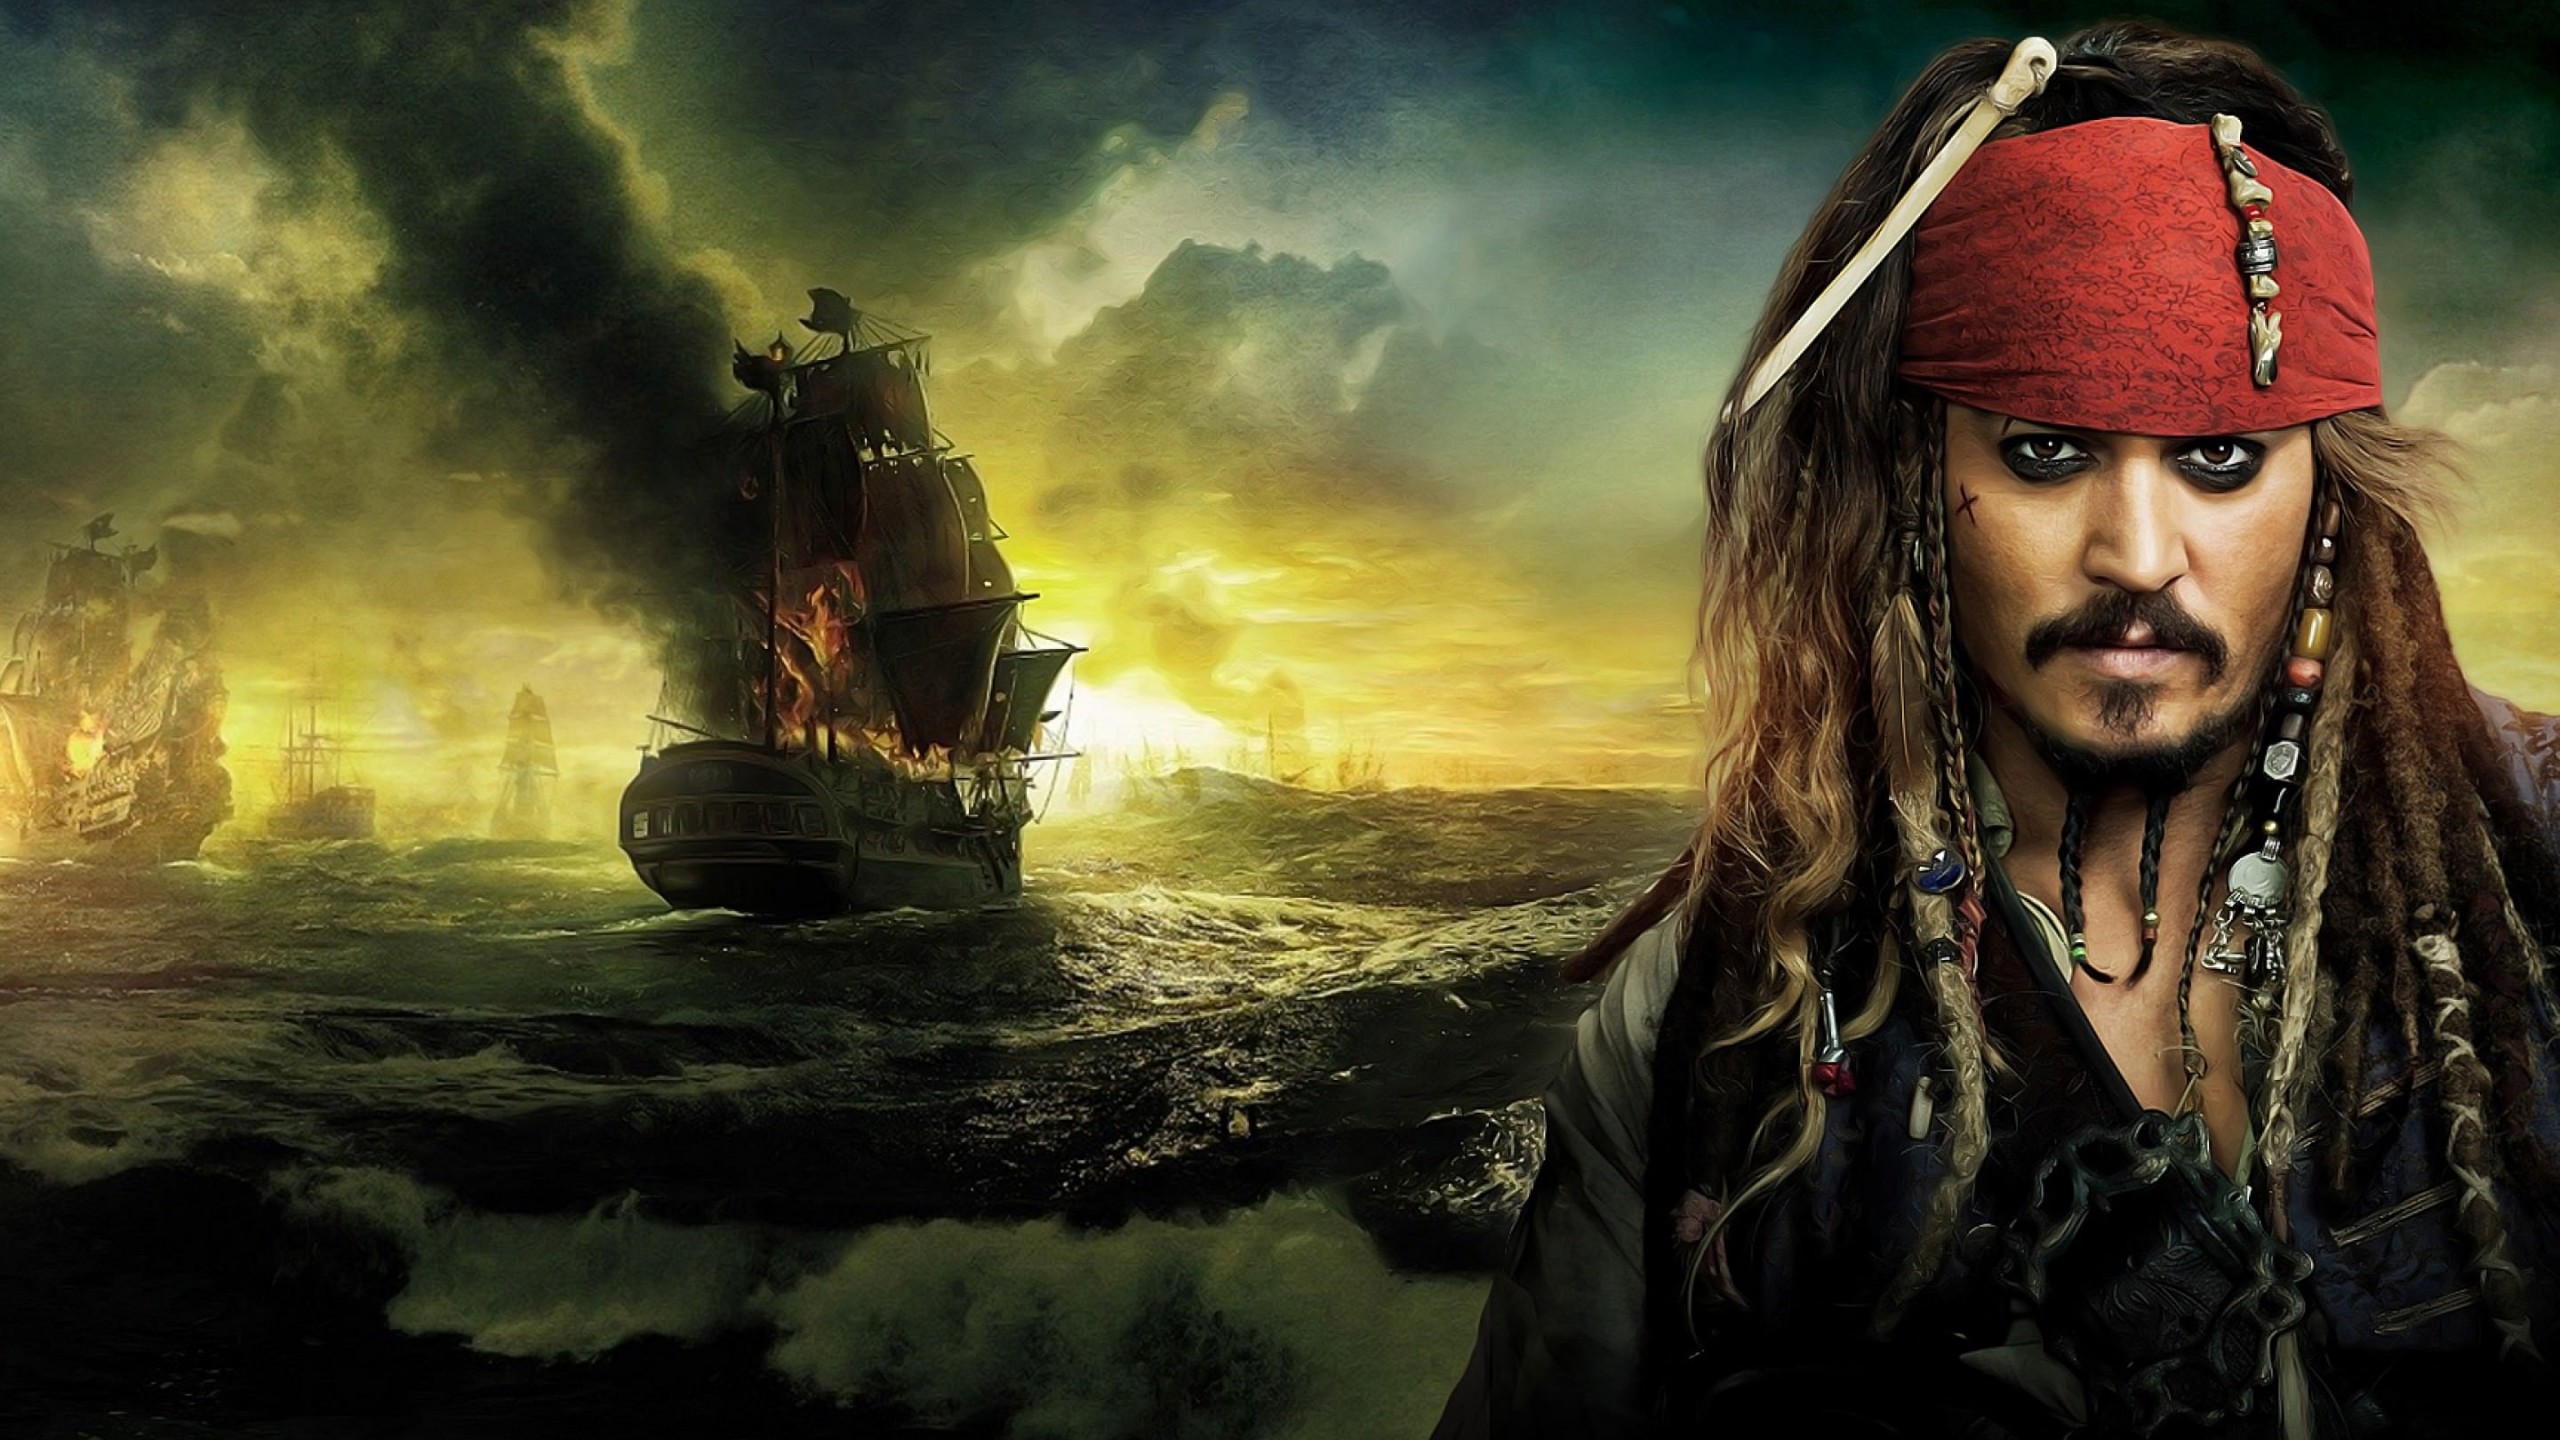 Jack Sparrow - Pirates Of The Caribbean Wallpaper for Social Media YouTube Channel Art